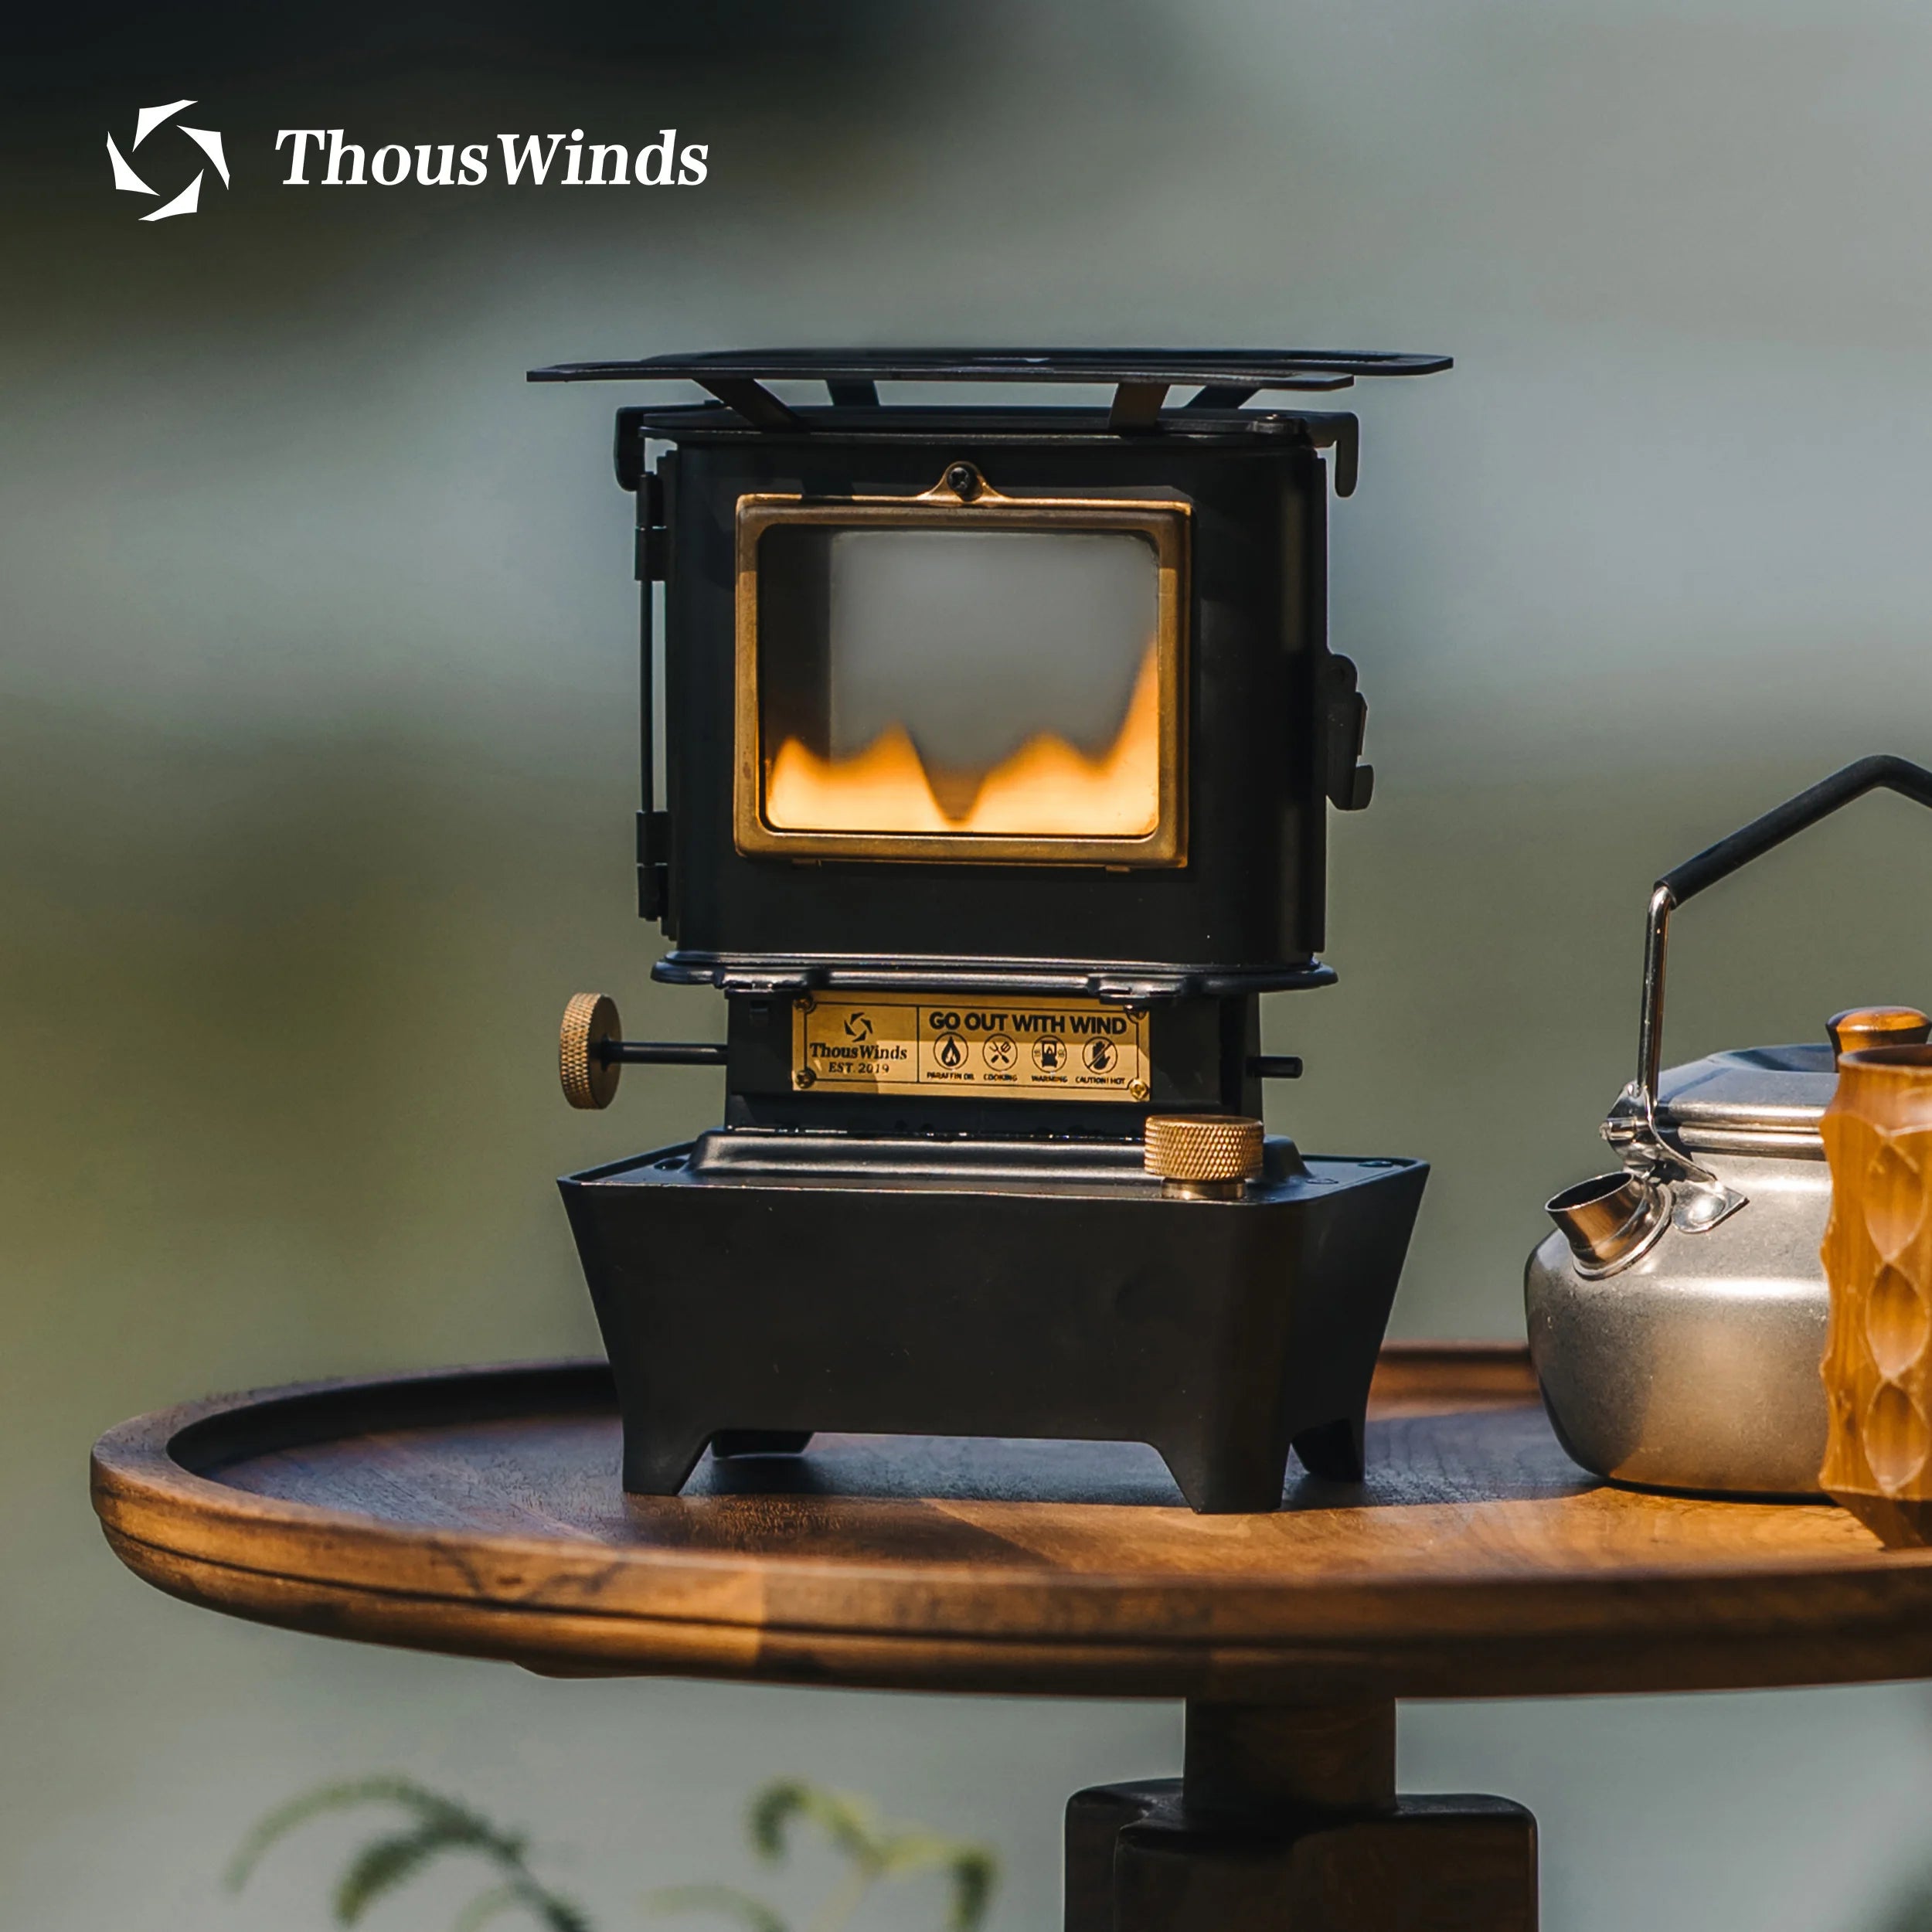 A chic, vintage-inspired Firedance Oil Lamp Stove carefully crafted from SUS304 stainless steel and brass. It features a 400ml fuel capacity and emits a warm, inviting glow, perfect for outdoor camping or indoor decor. This versatile and stylish piece of homeware is conveniently sized for both functional use and storage. Available in classy black and luxurious brass options. The item weighs 1705g, demonstrating its robustness and durability. A wonderful fusion of style, convenience, and practicality.